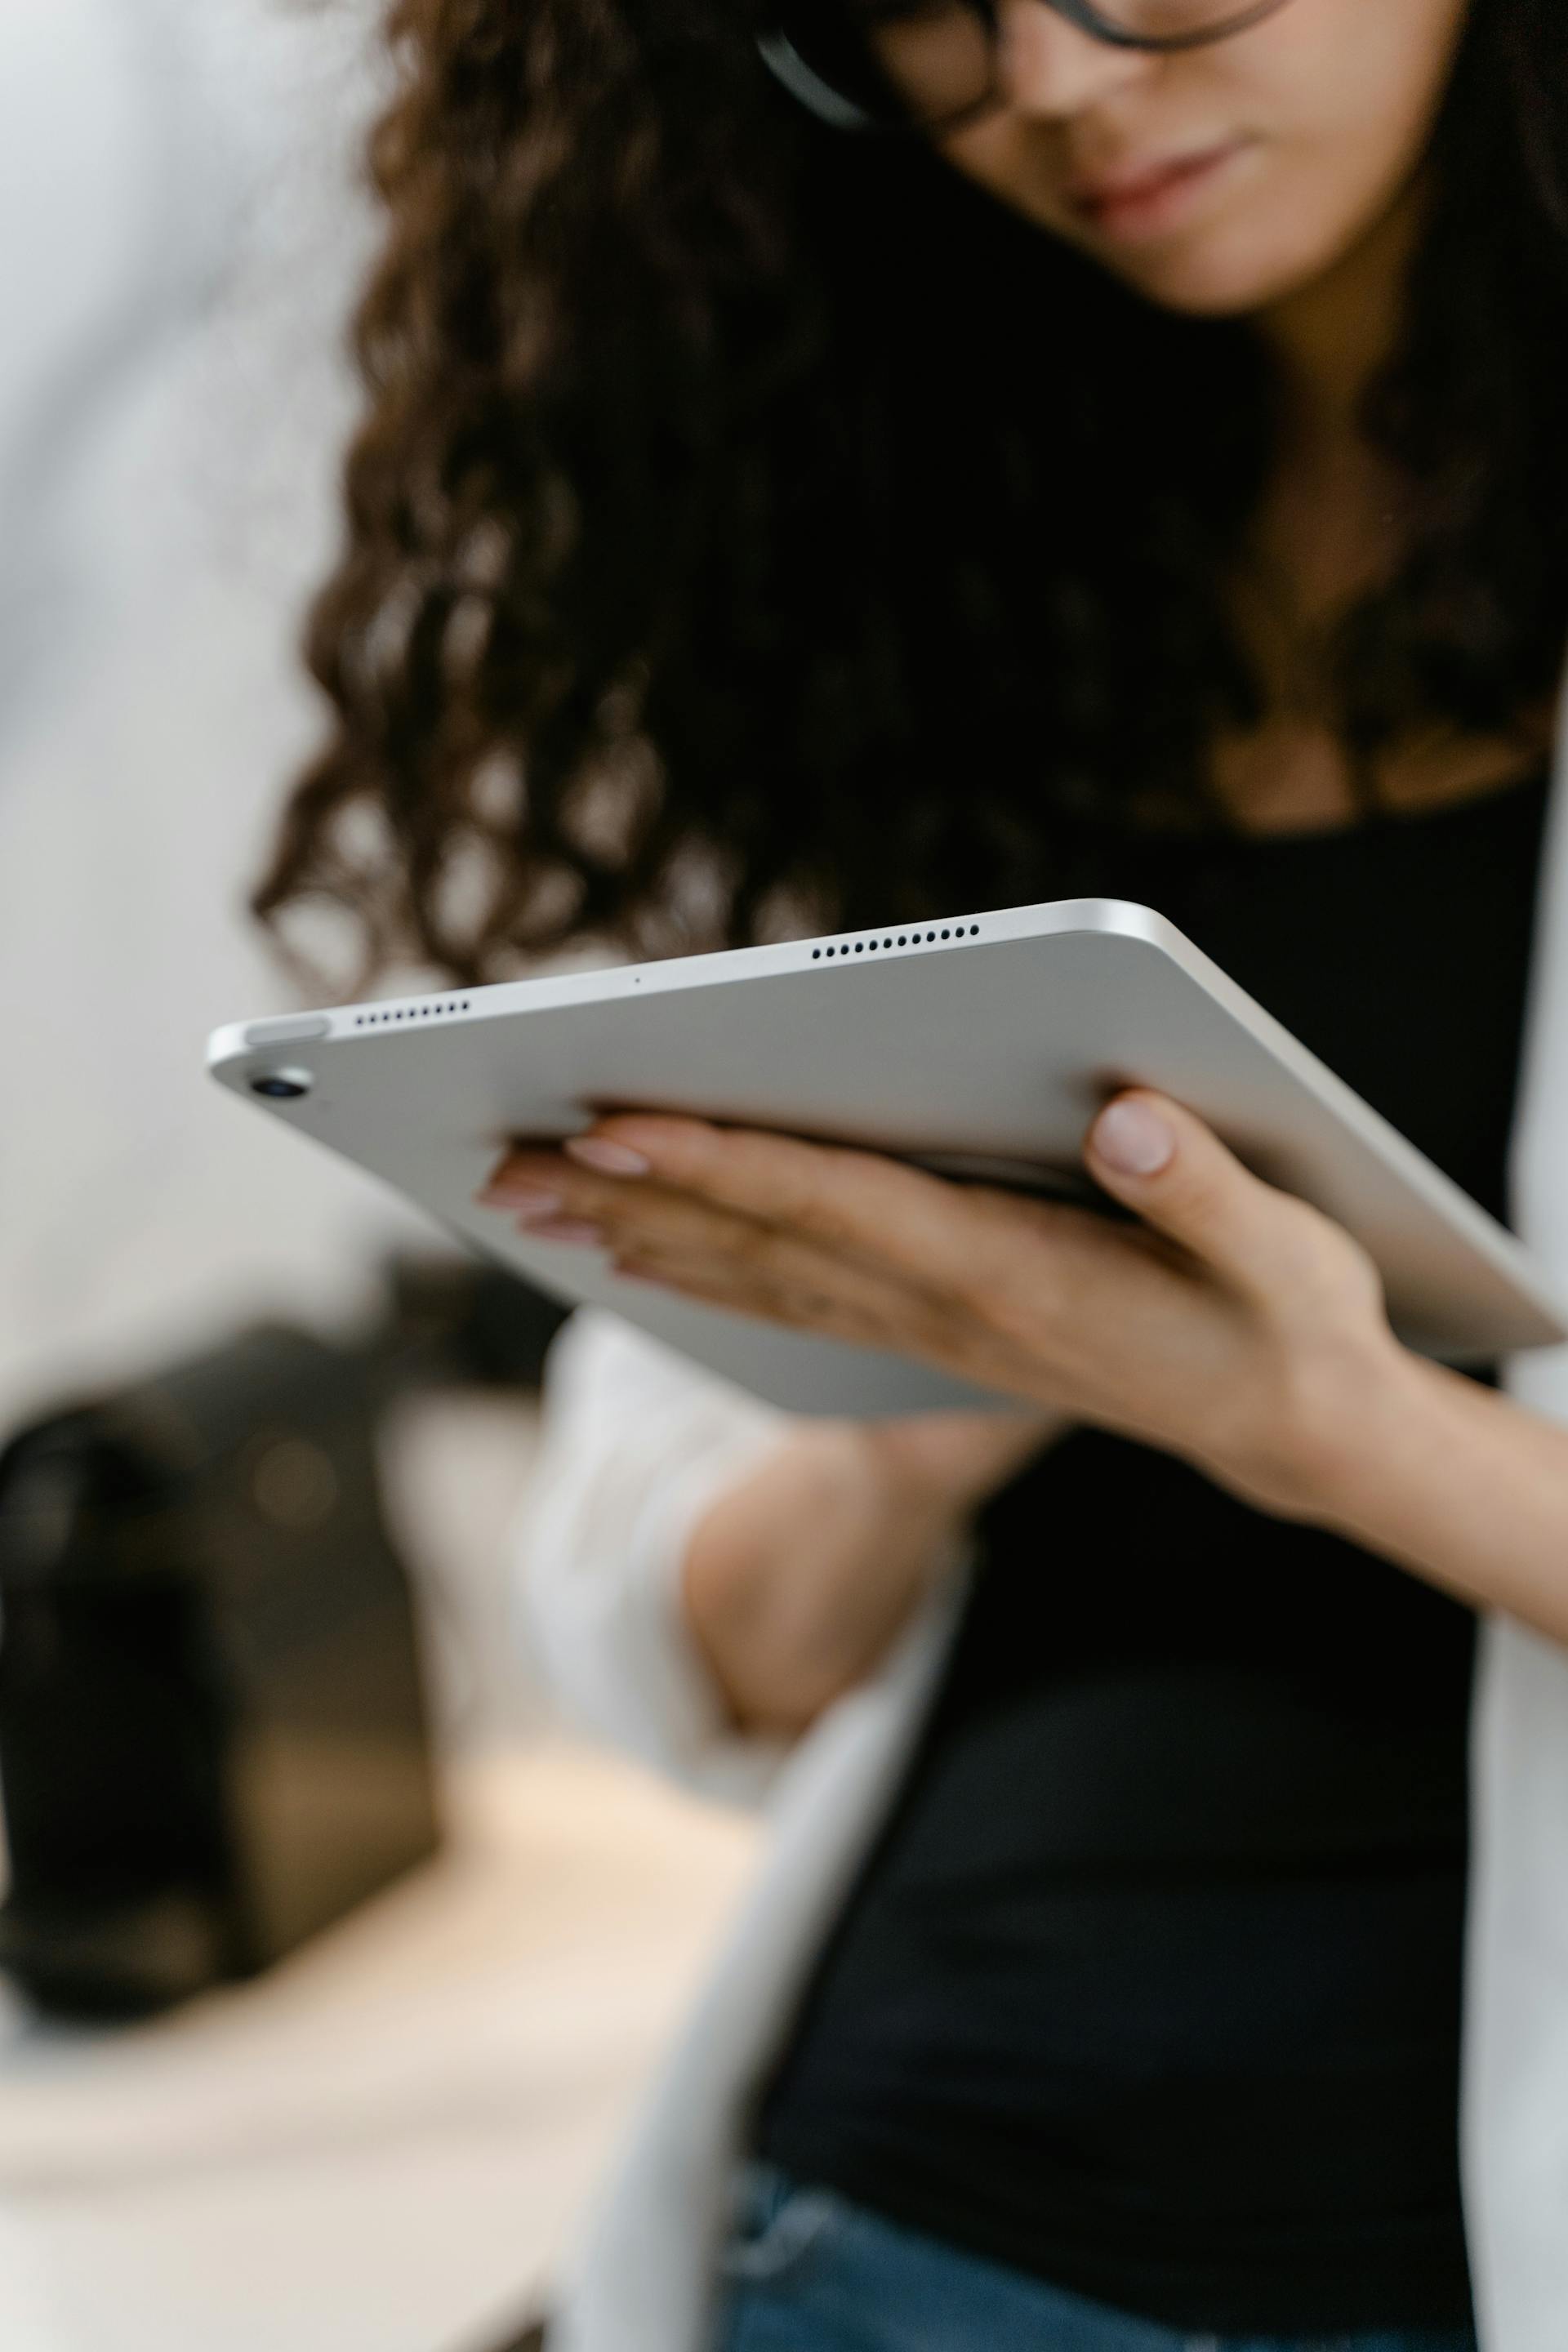 A person holding a tablet | Source: Pexels